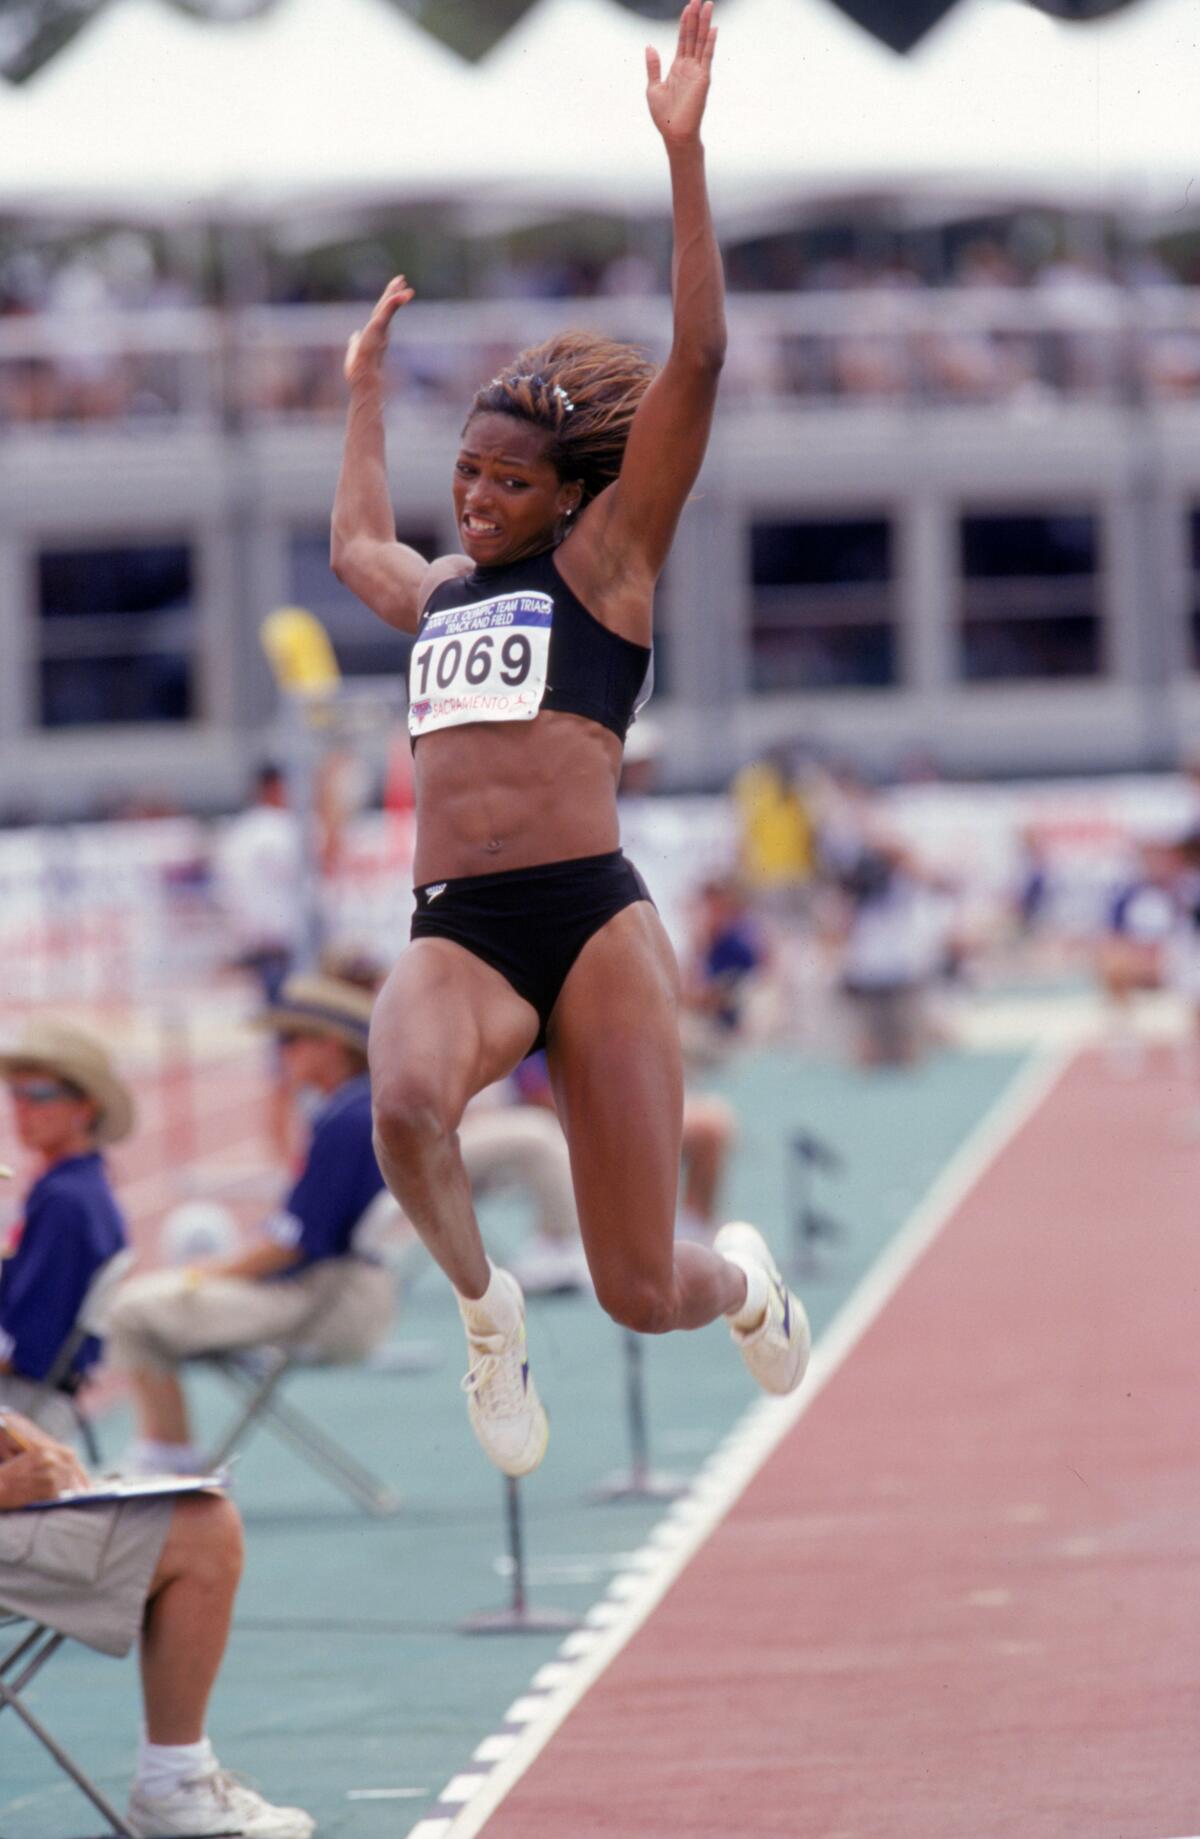 "Top Chef" contestant Dawn Burrell competing in the Long Jump Event of the 2000 U.S. Olympic Track & Field Team Trials